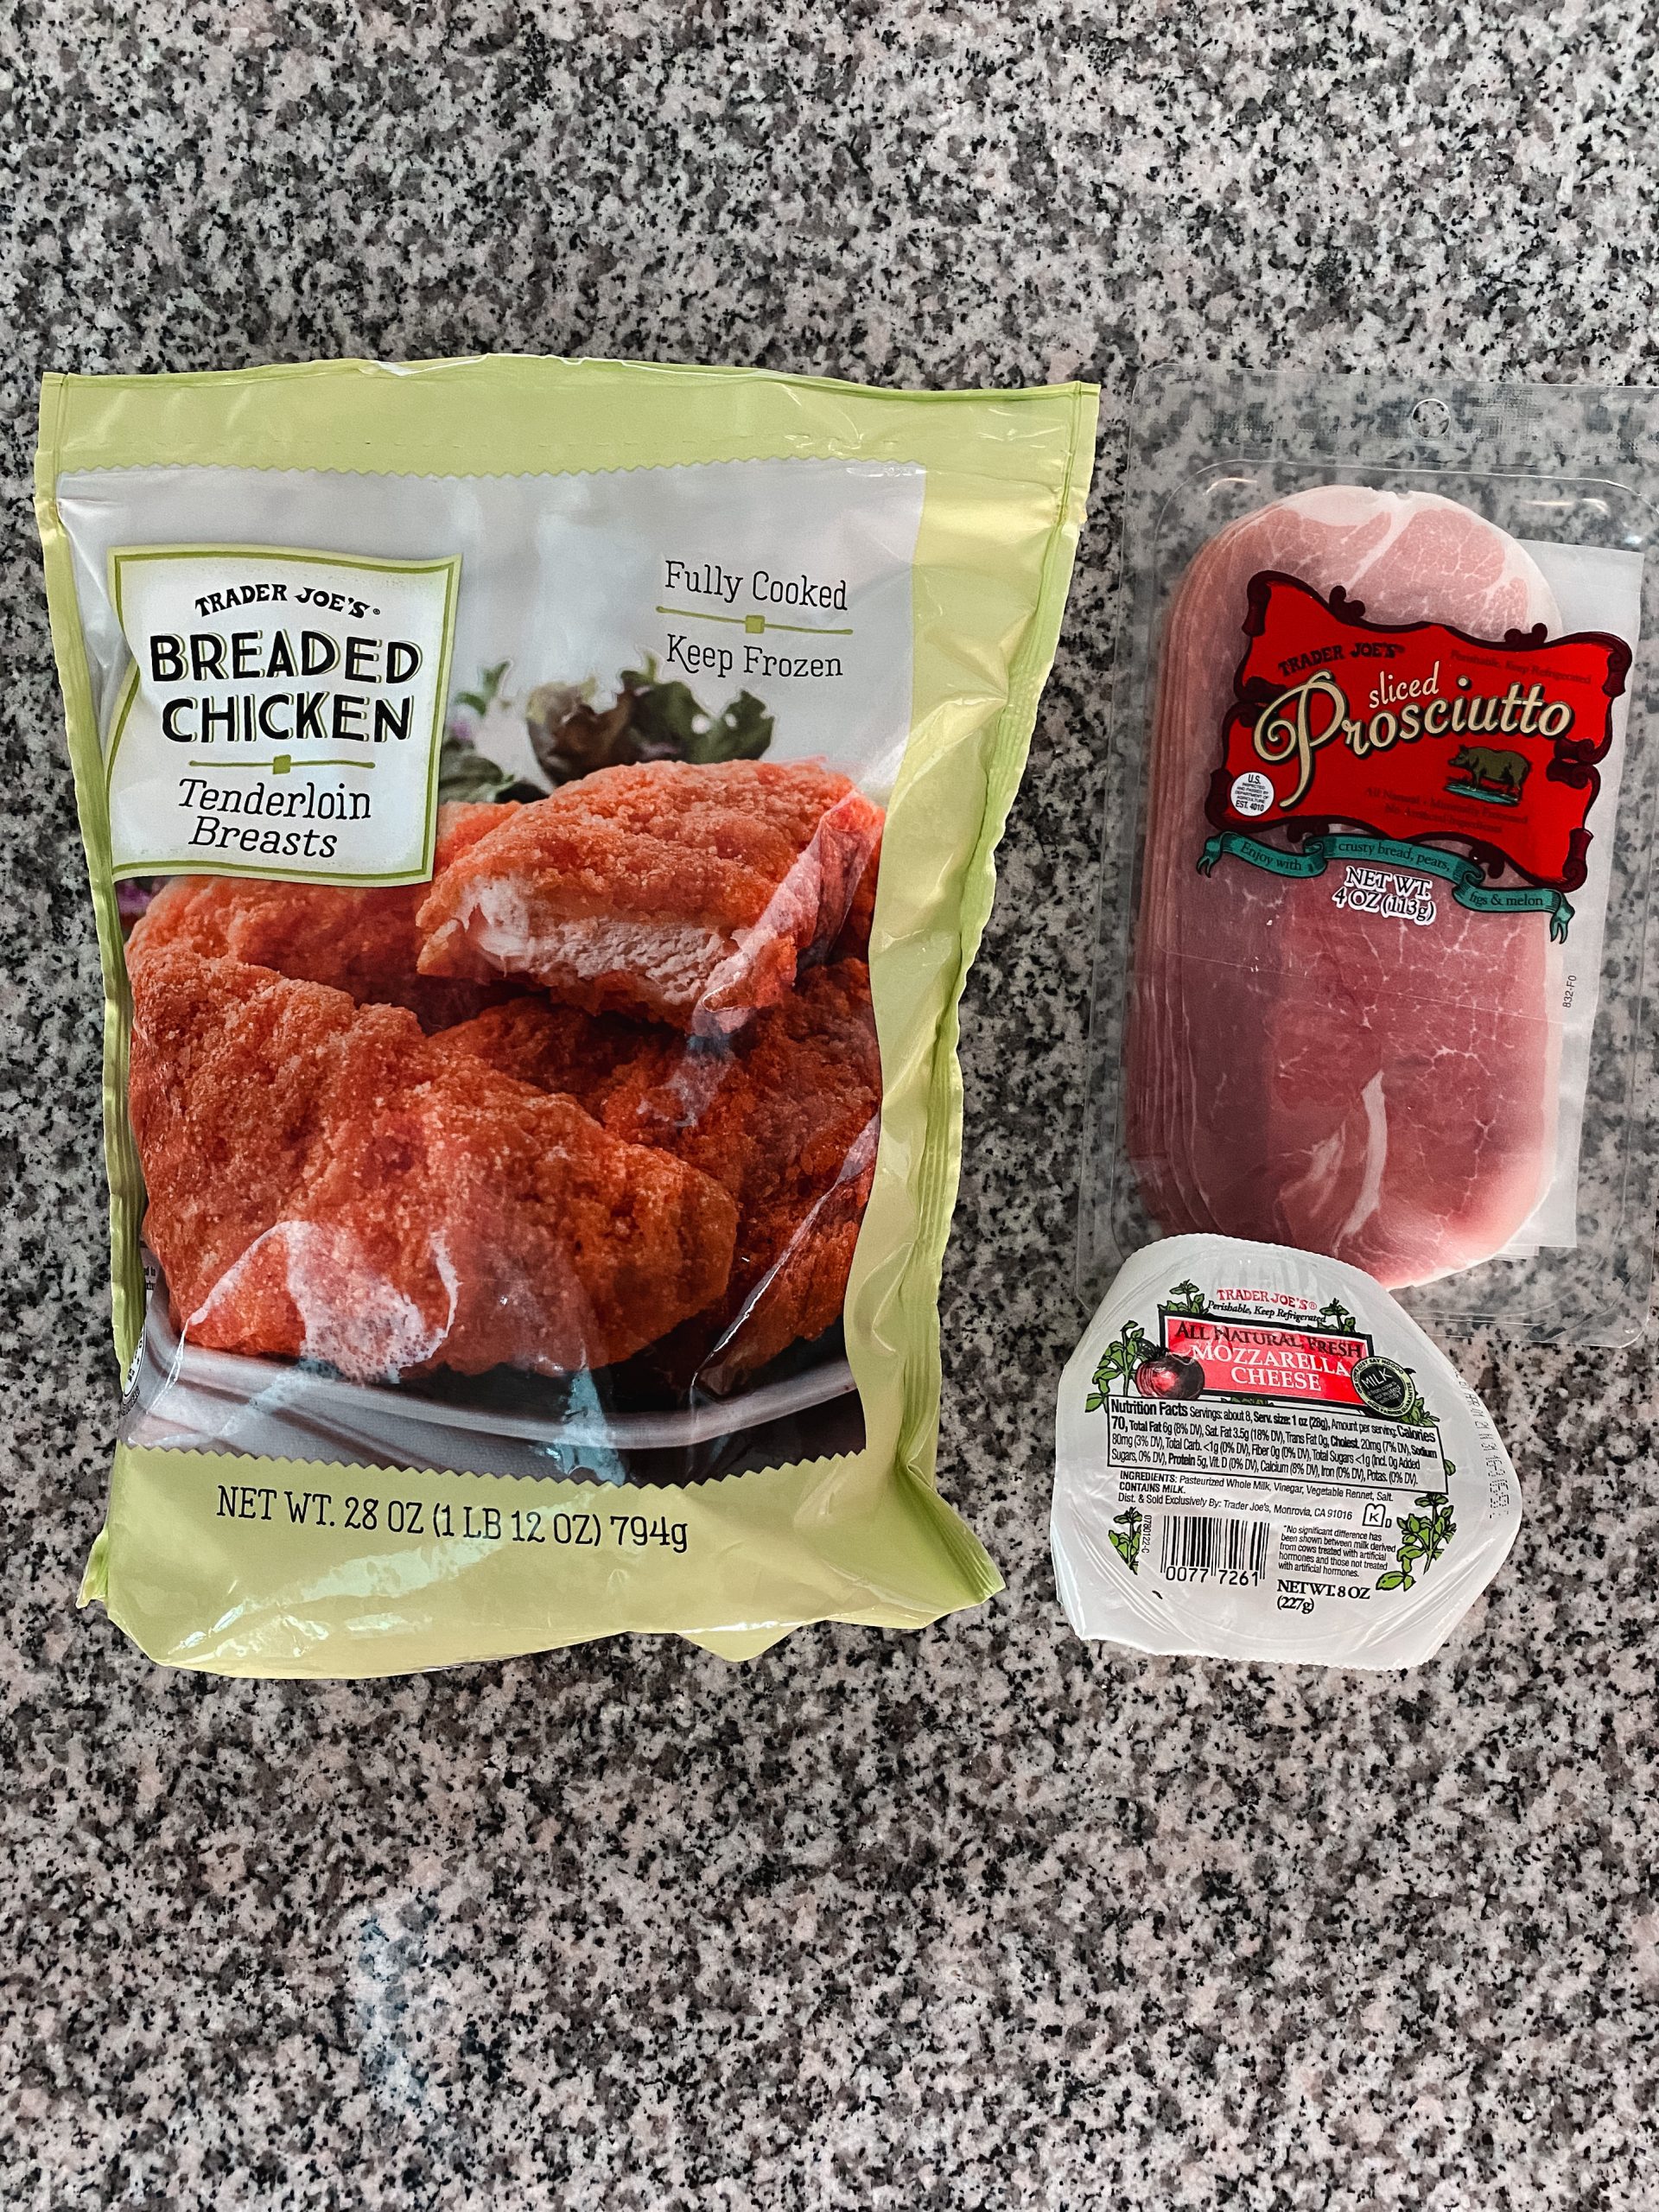 chicken tenders with mozzarella and prosciutto 3-ingredient trader joe's meal